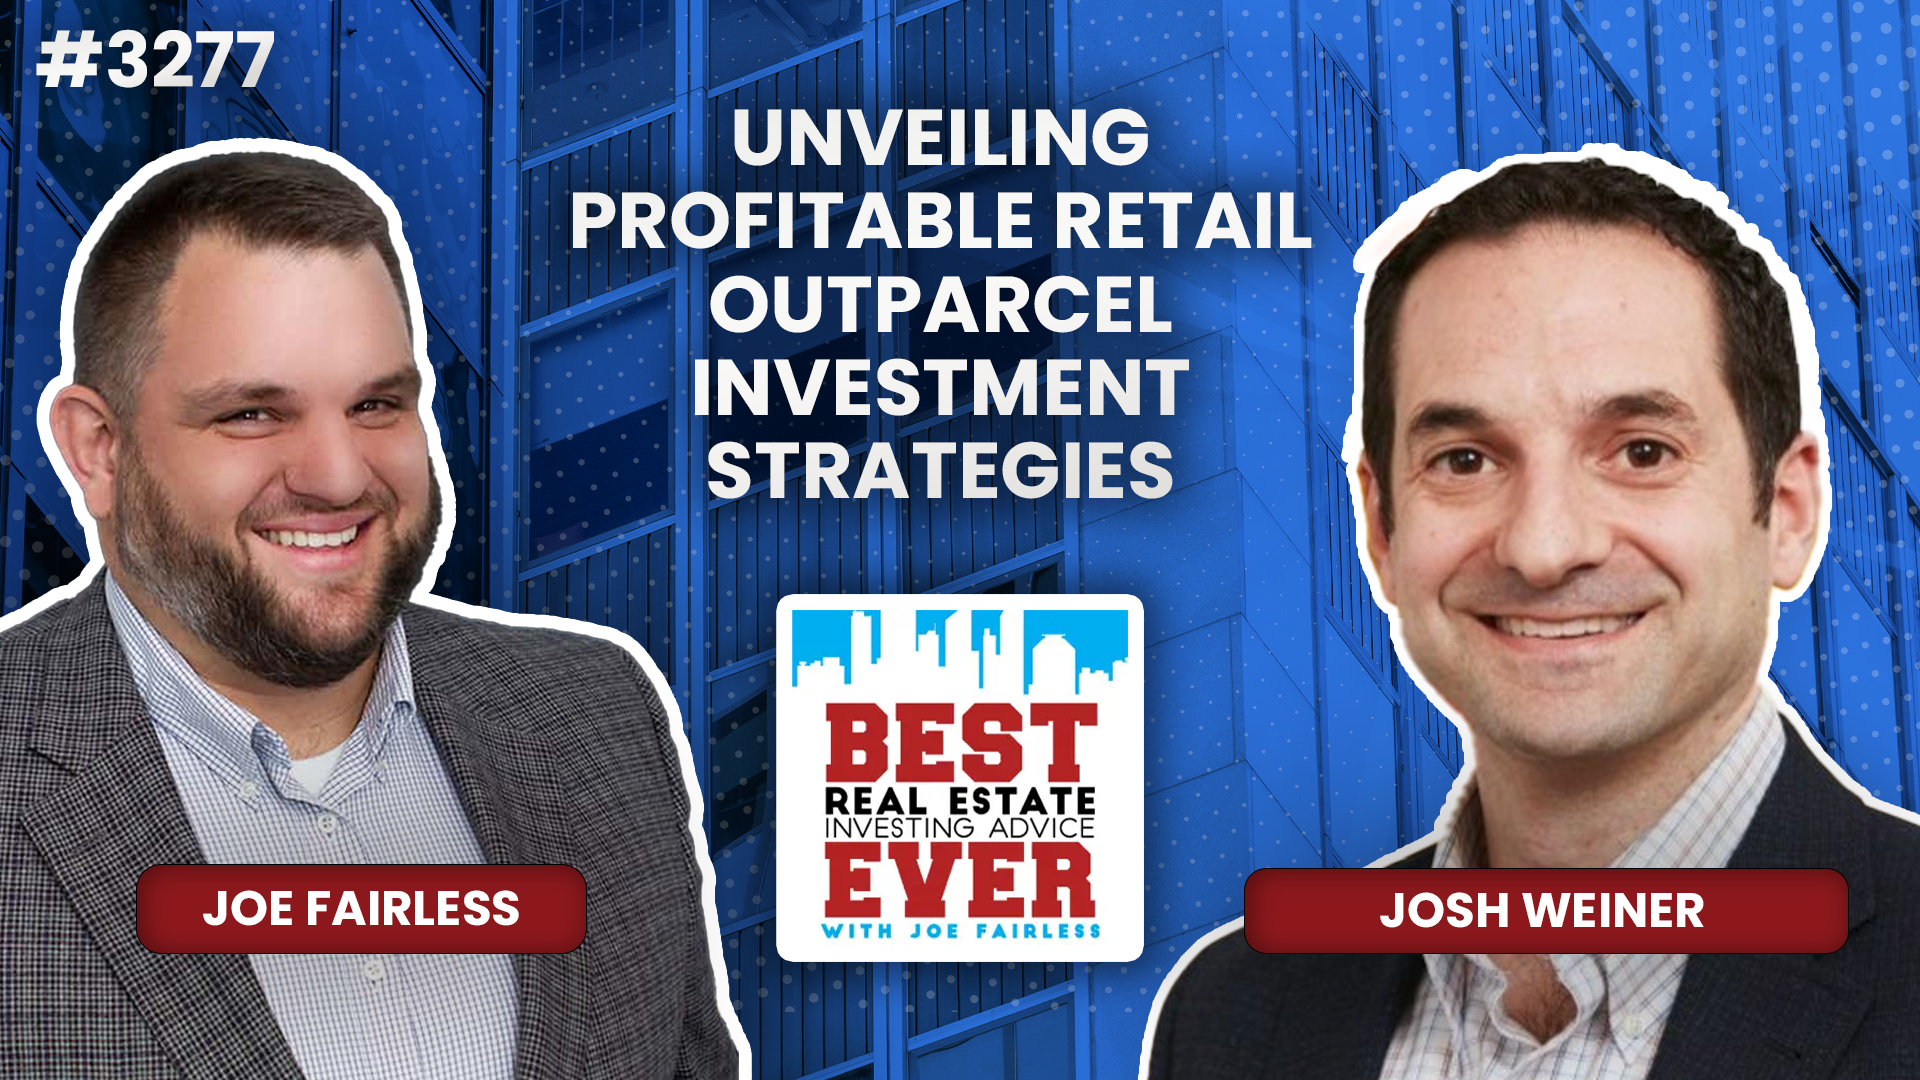 JF3277: Josh Weiner — Unveiling Profitable Retail Outparcel Investment Strategies